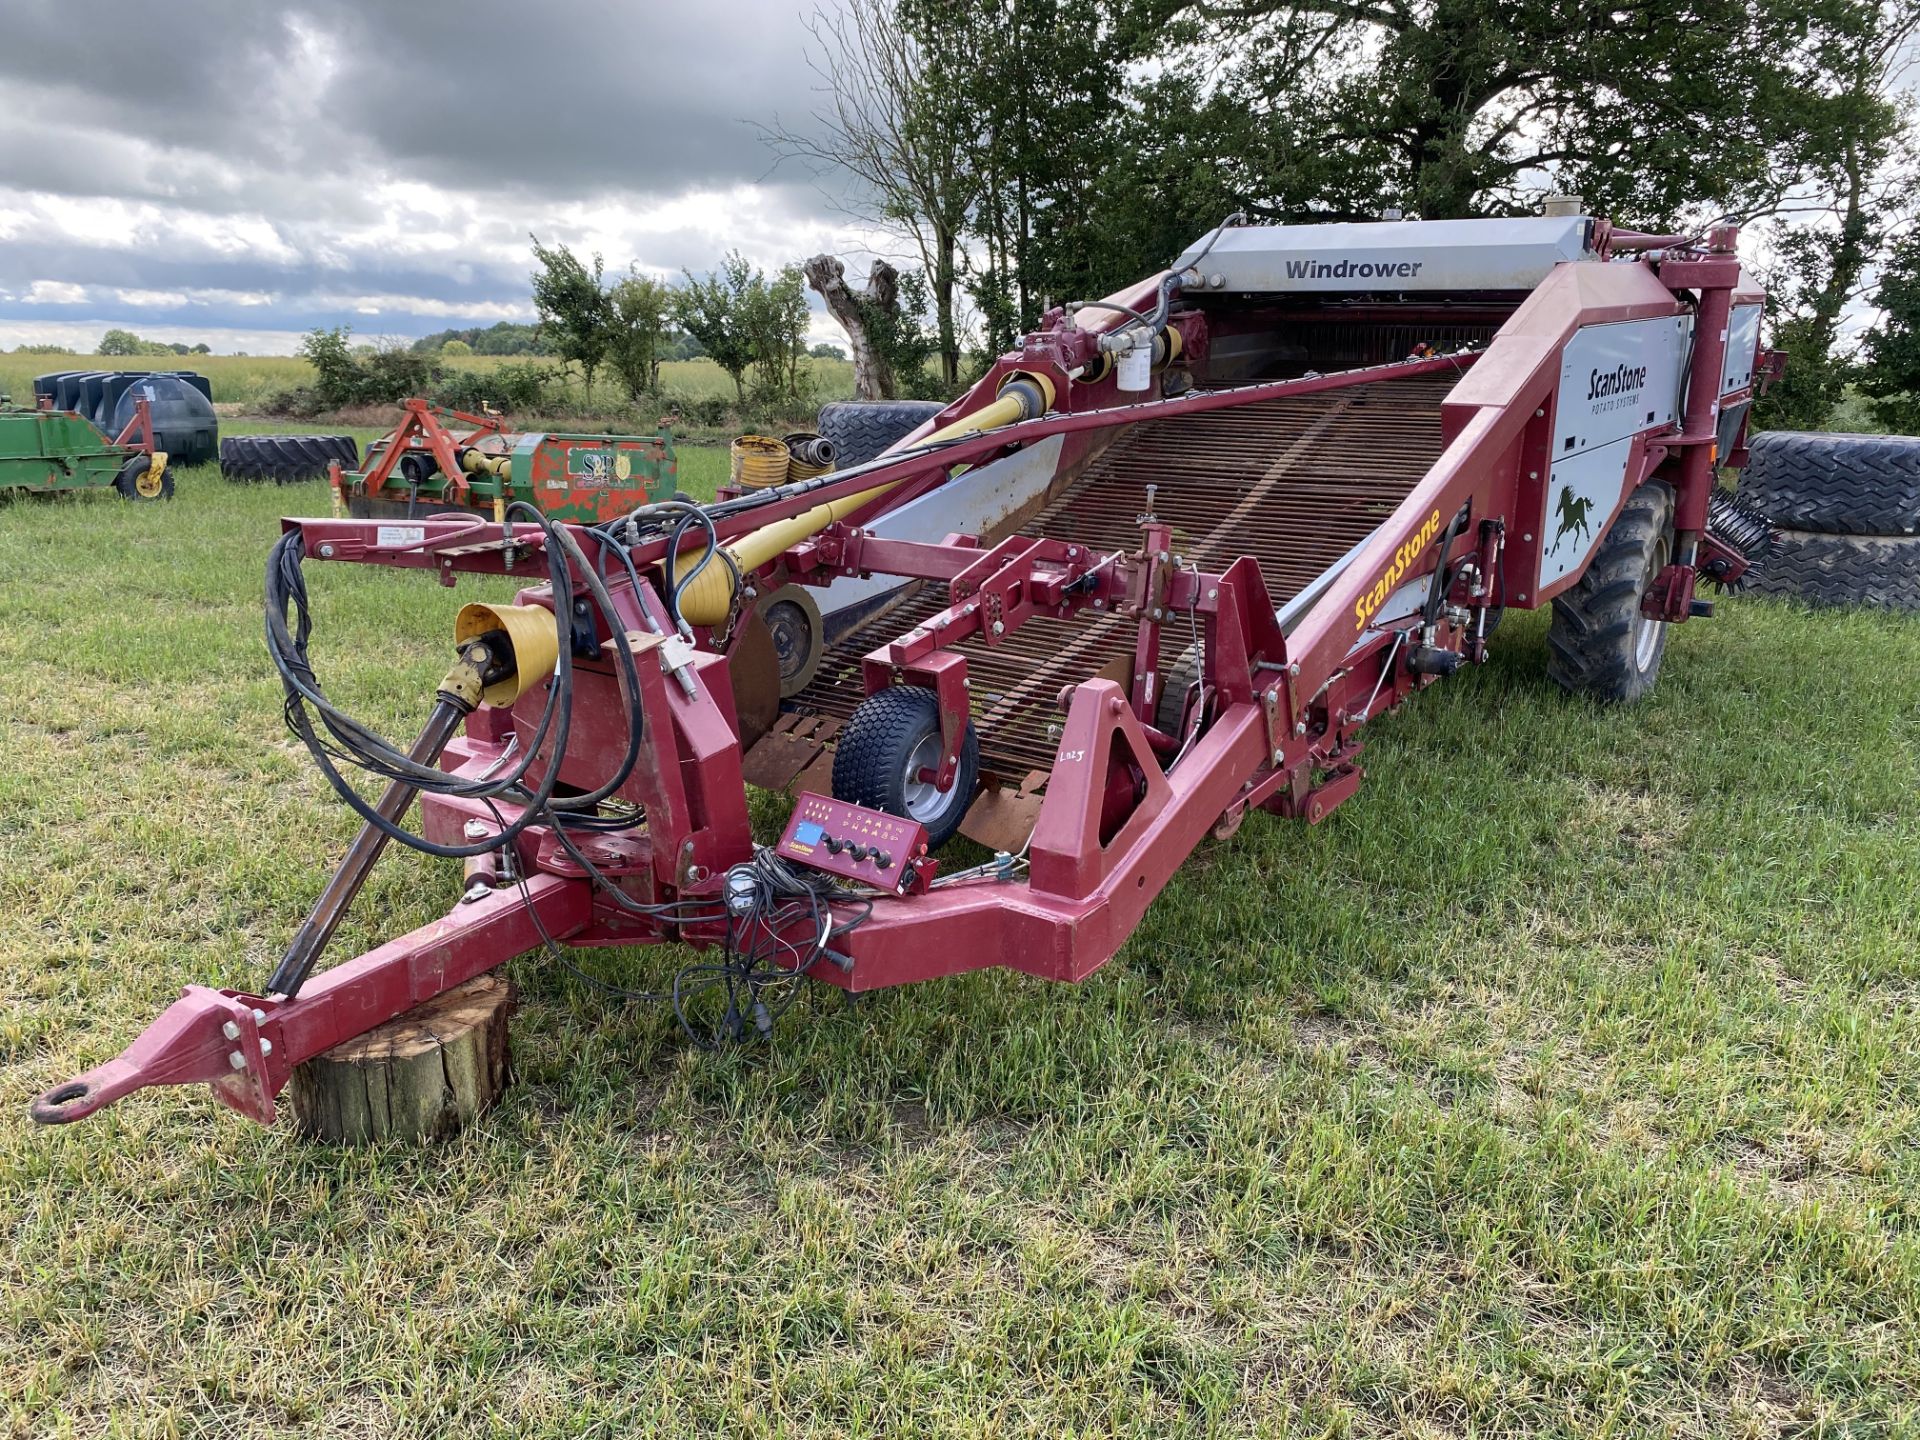 Scanstone trailed Windrower. Model WD17-2+5. 2014. Serial number 2030. Set for 72" beds. LM - Image 3 of 29